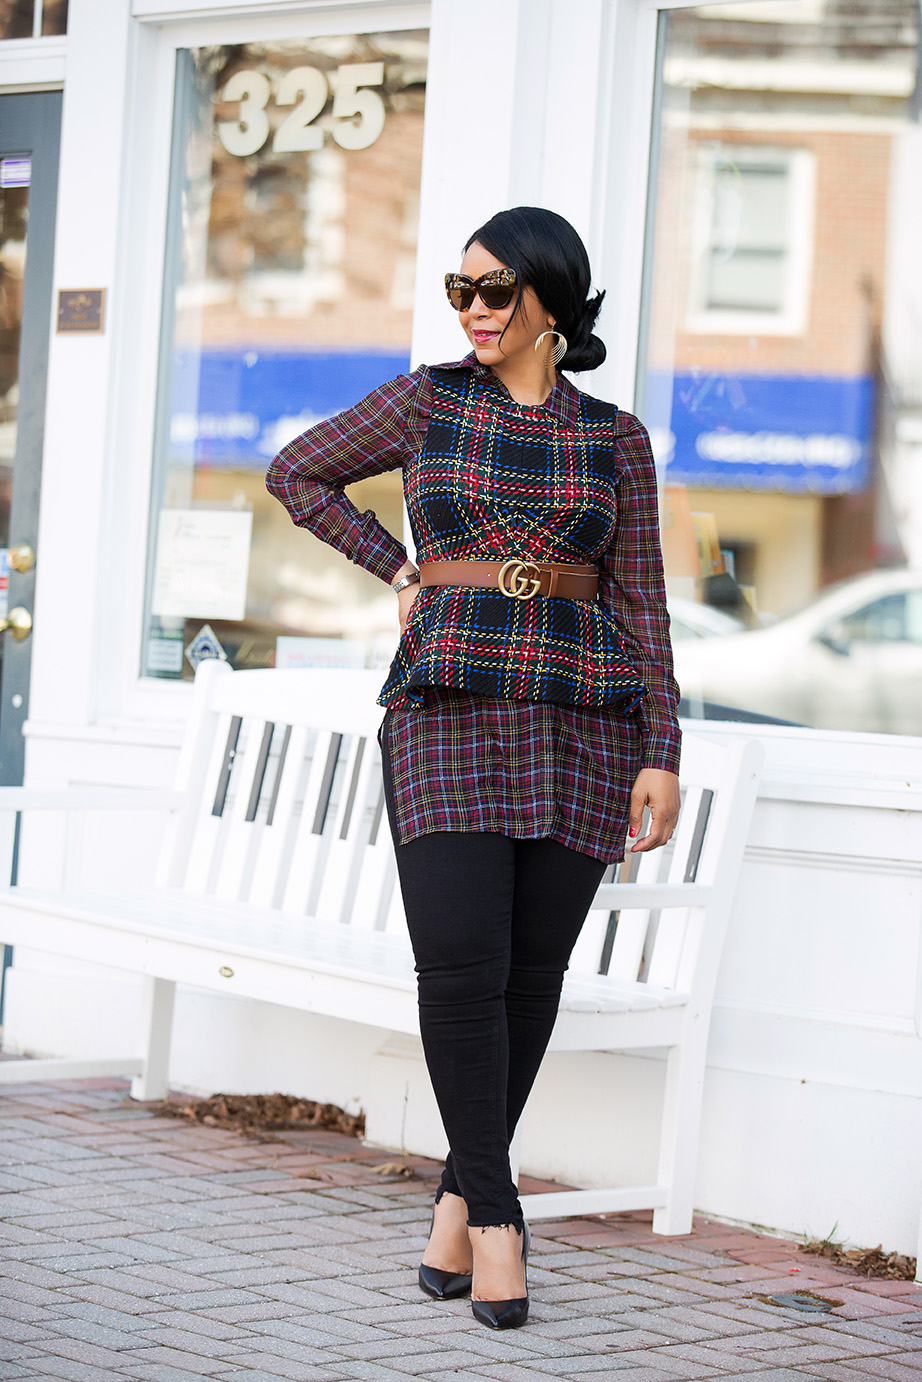 Style in a Cinch: What I'm Wearing - ASOS Tartan Peplum Top, Sheer Plaid Shirt, Gucci Ayers Leather belt with double G buckle, Topshop Step Hem Jeans, Christian Louboutin Pigalle 100 black leather pumps, What's Haute